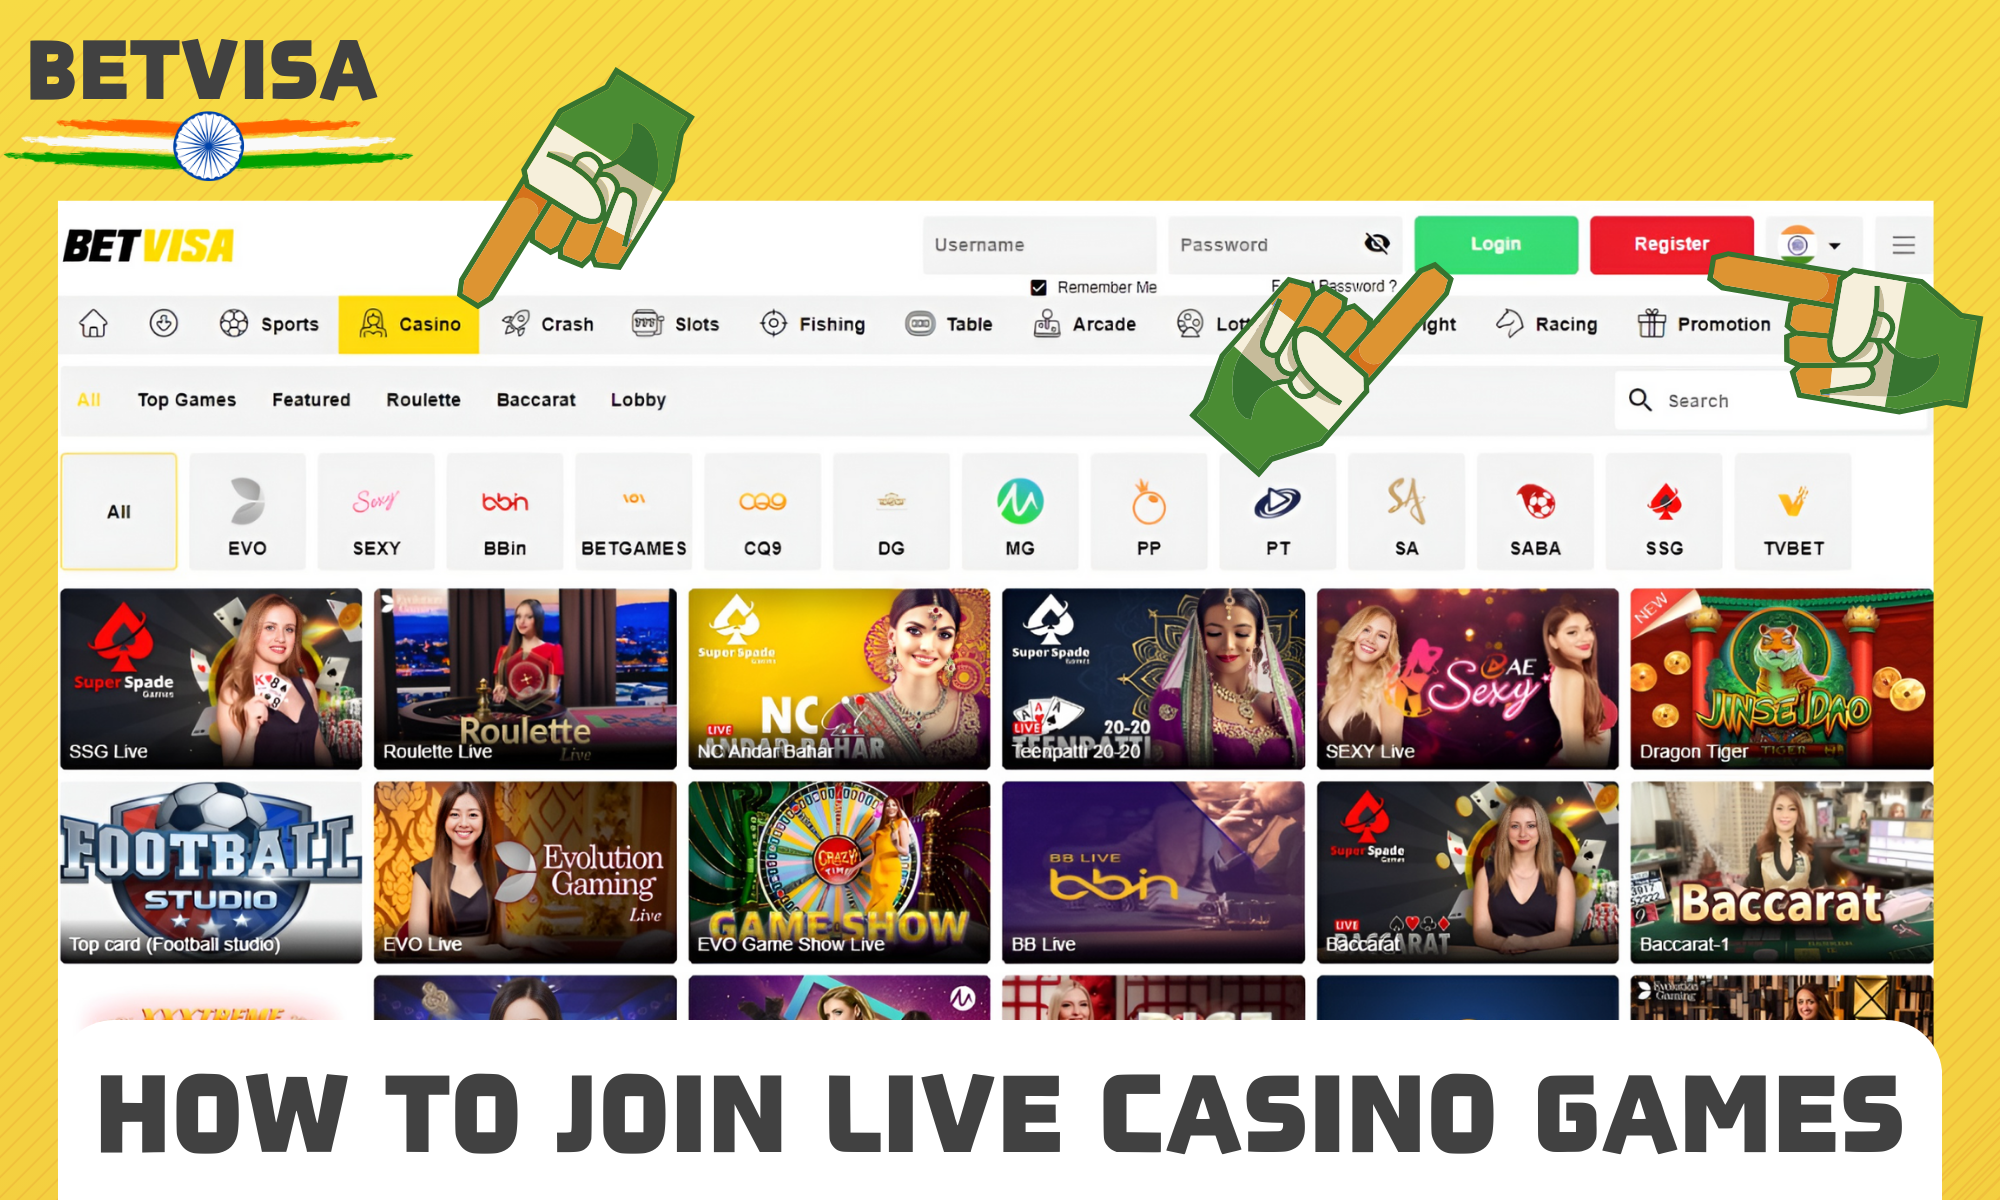 Detailed instructions on how to start playing Betvisa online games